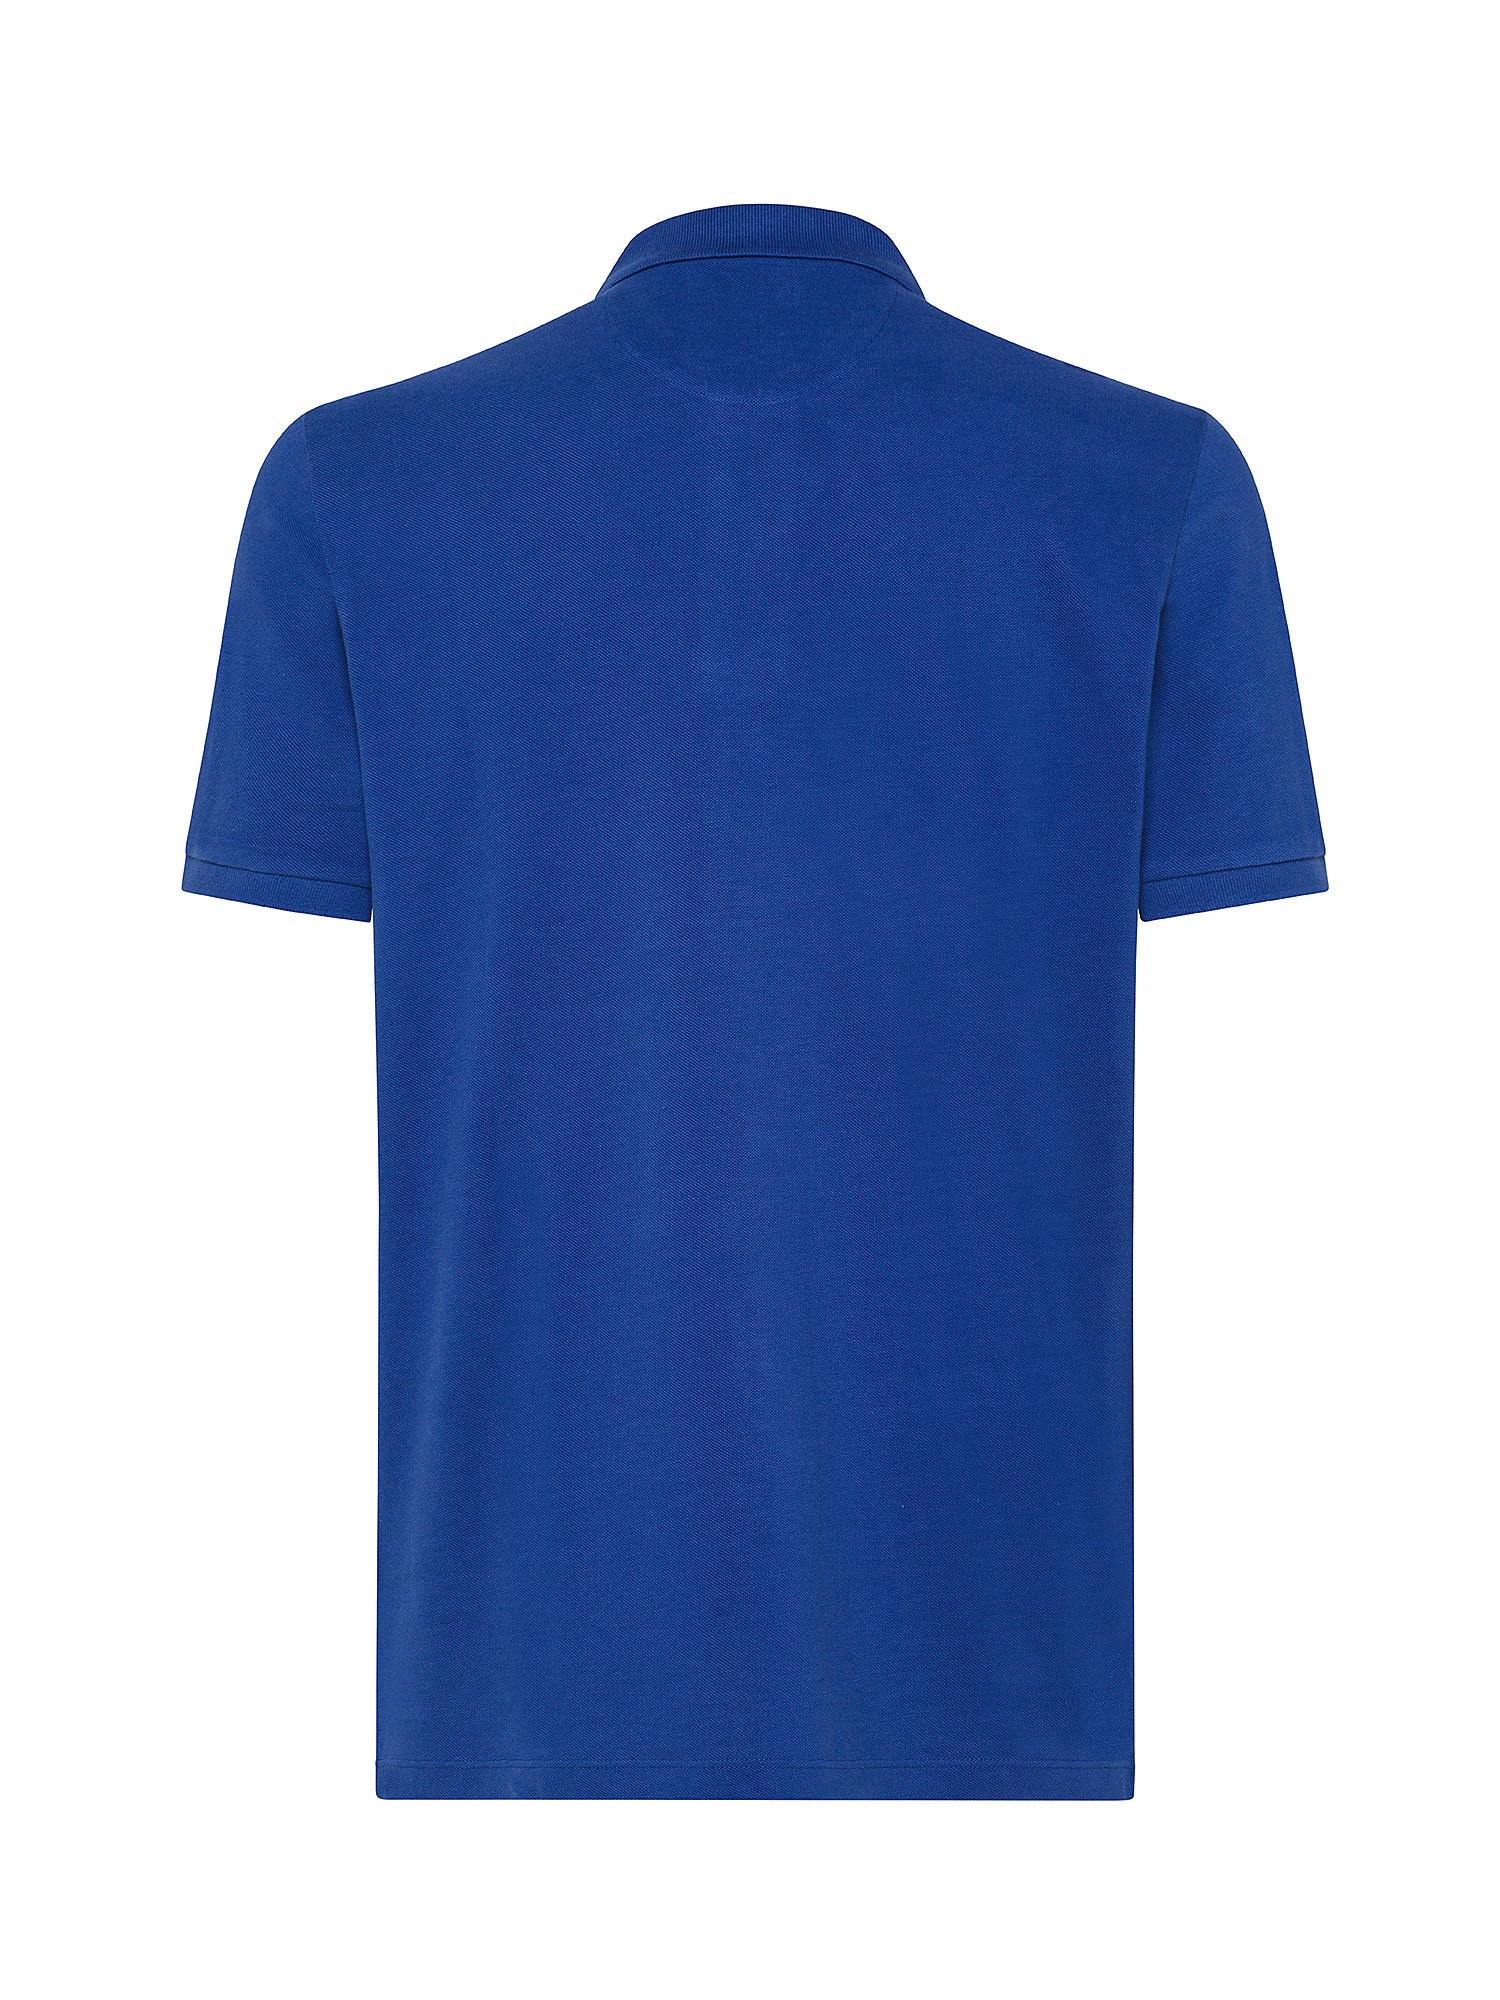 Luca D'Altieri - Polo in pure cotton, Royal Blue, large image number 1